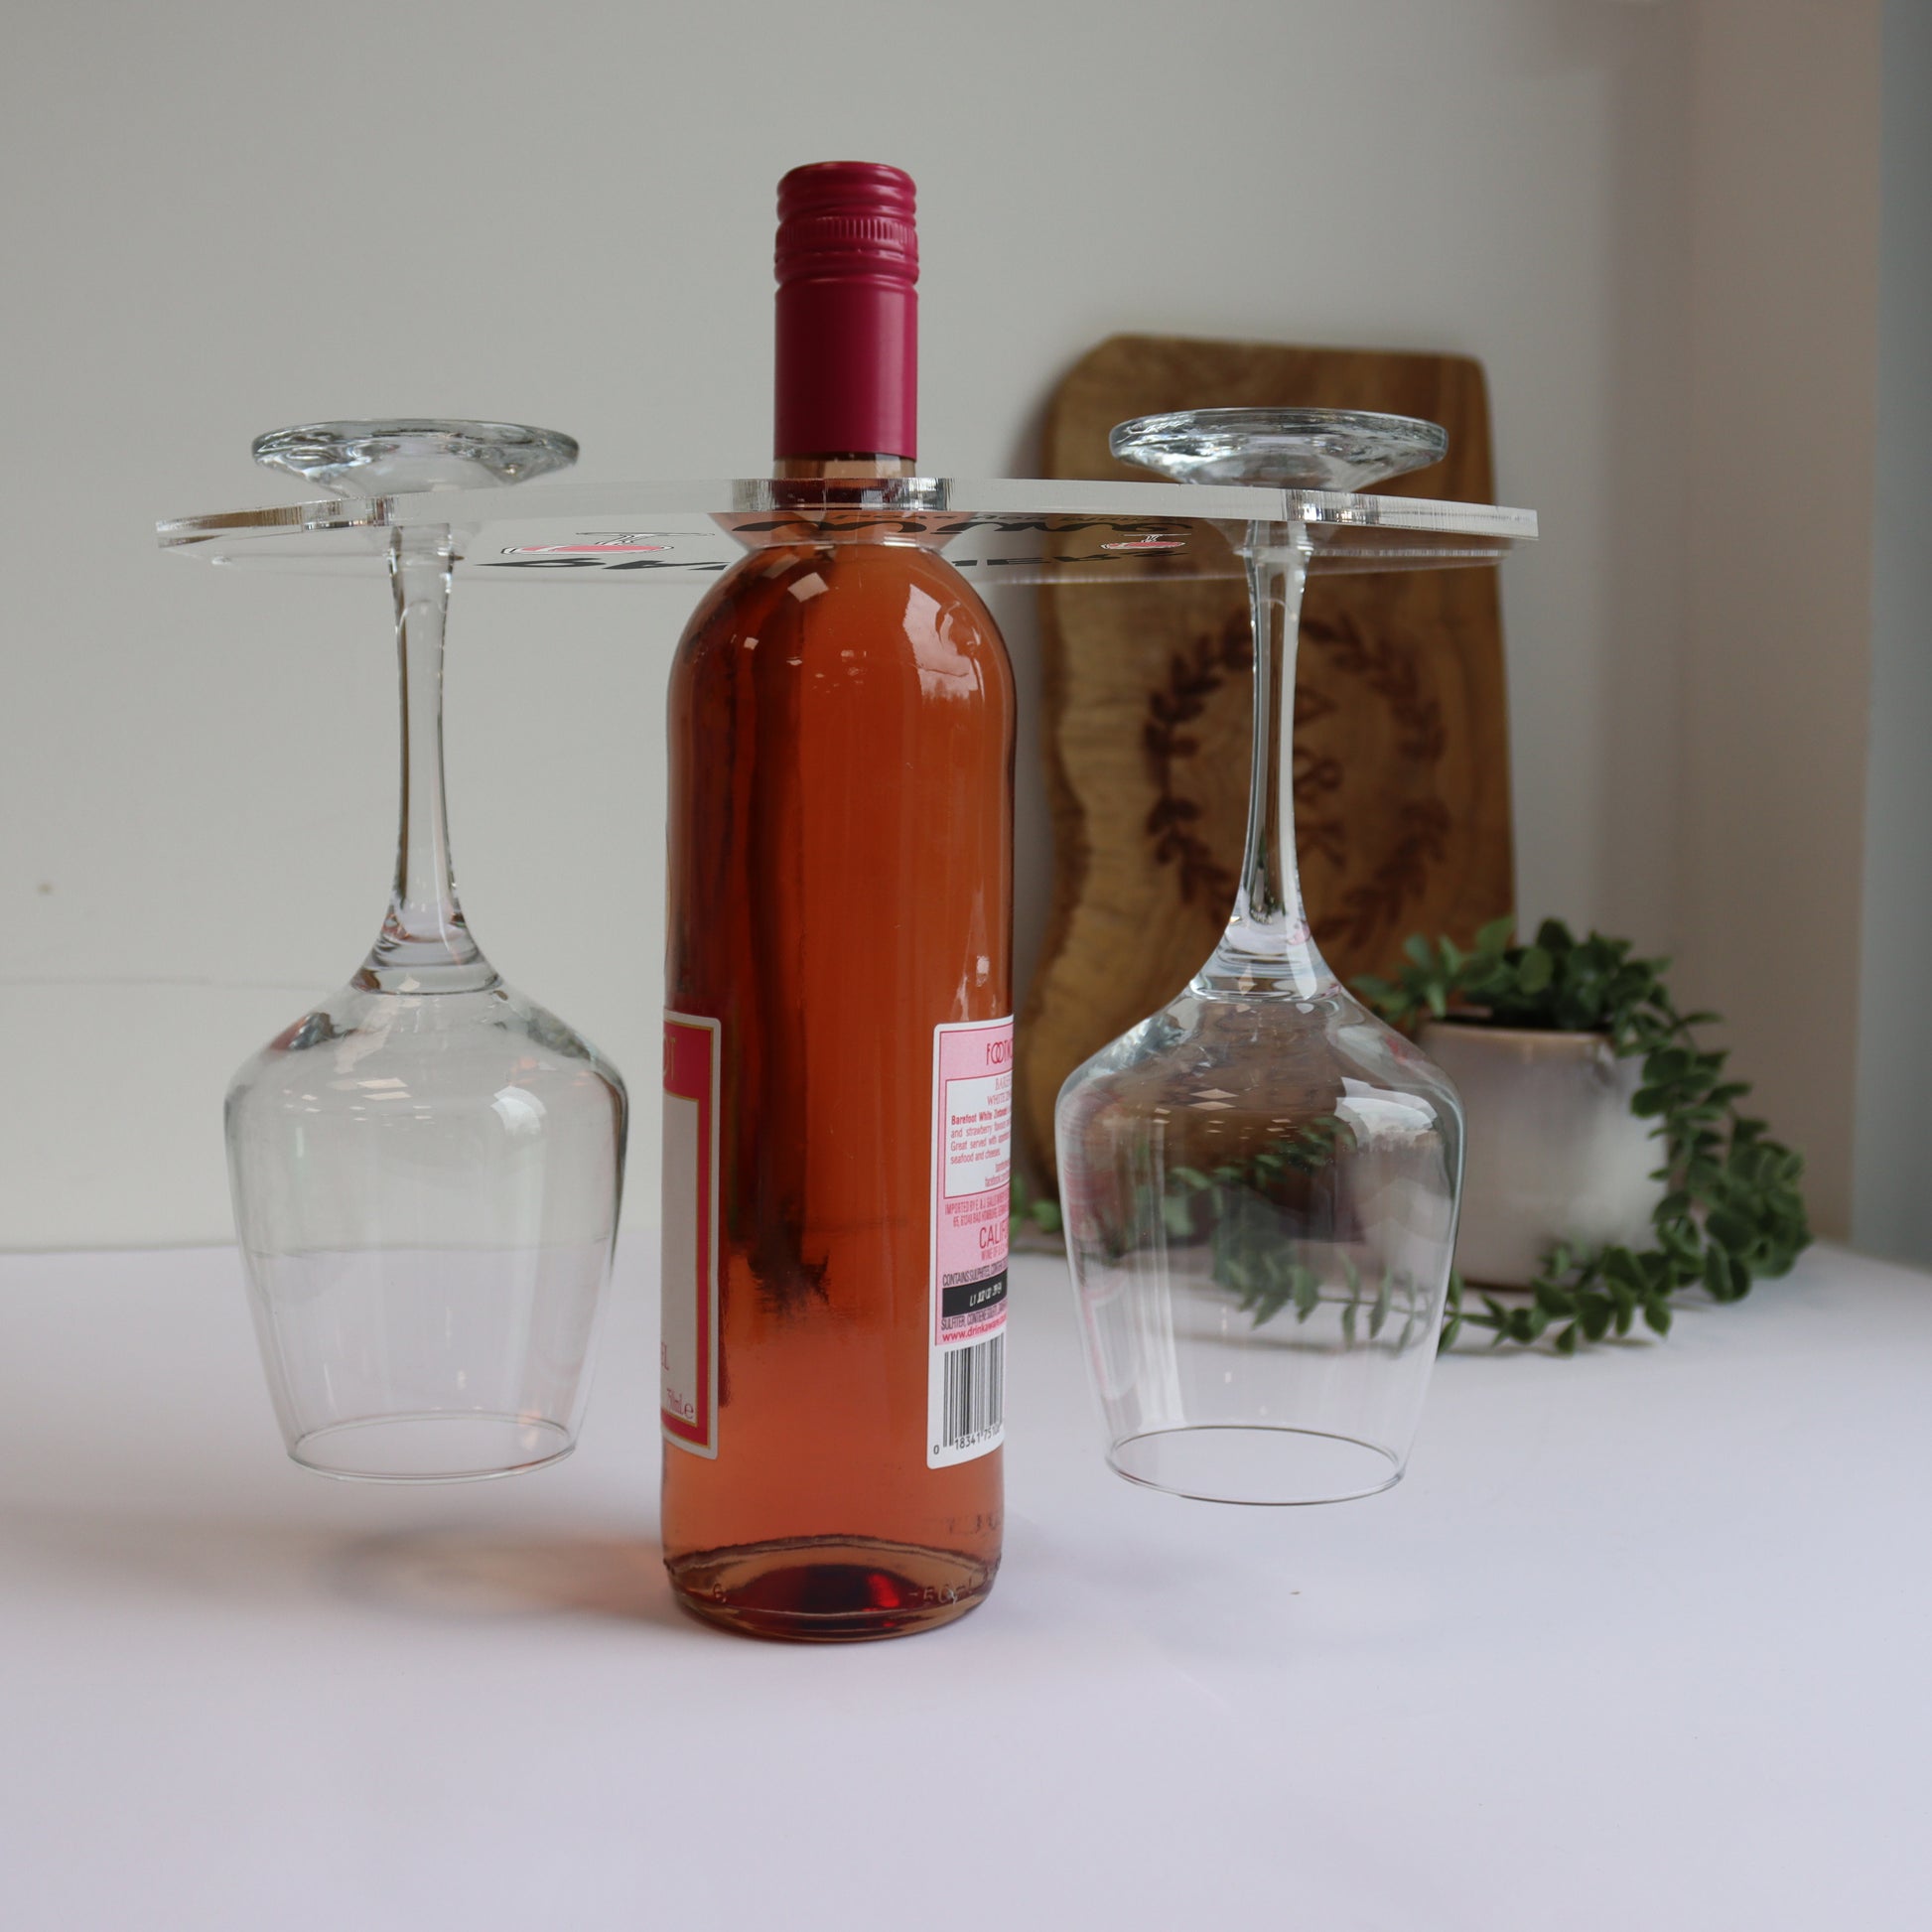 simple wine glass bottle and wine display holder gift for friend gift for Mum